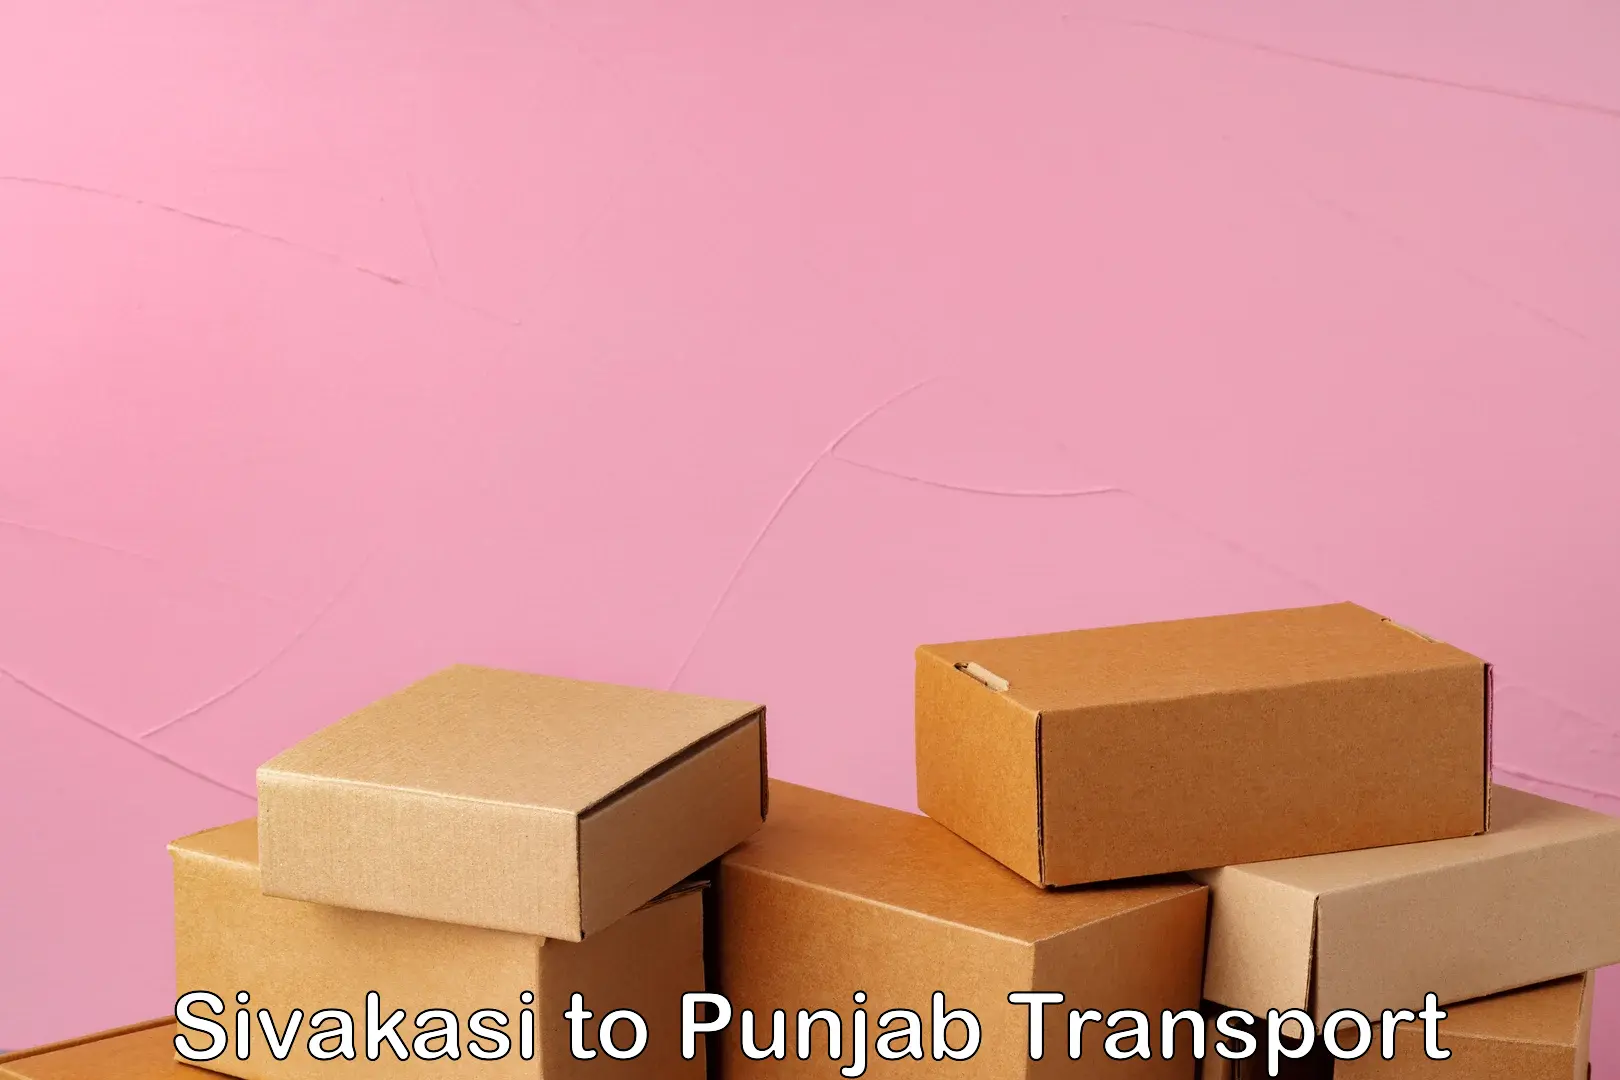 Truck transport companies in India in Sivakasi to Ropar